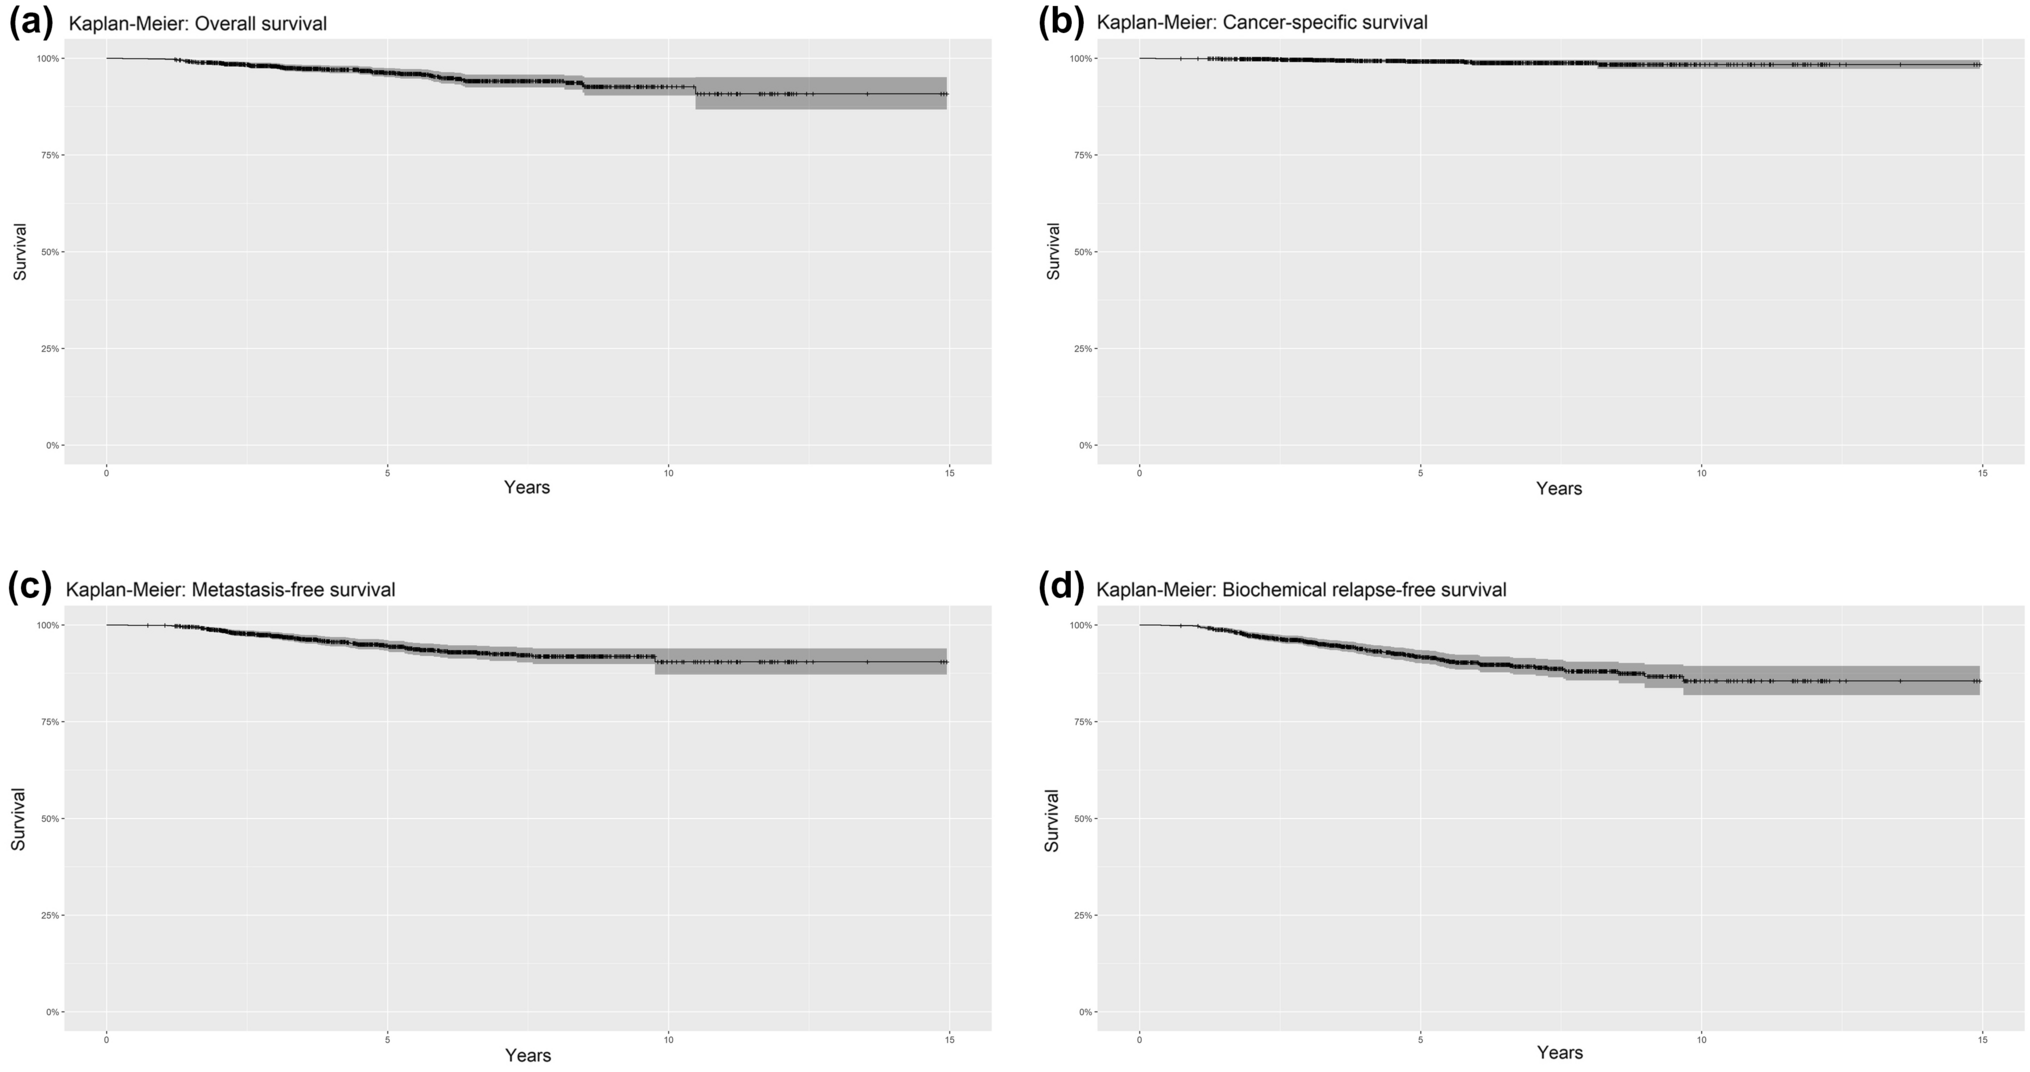 Image-guided moderately hypofractionated radiotherapy for localized prostate cancer: a multicentric retrospective study (IPOPROMISE)